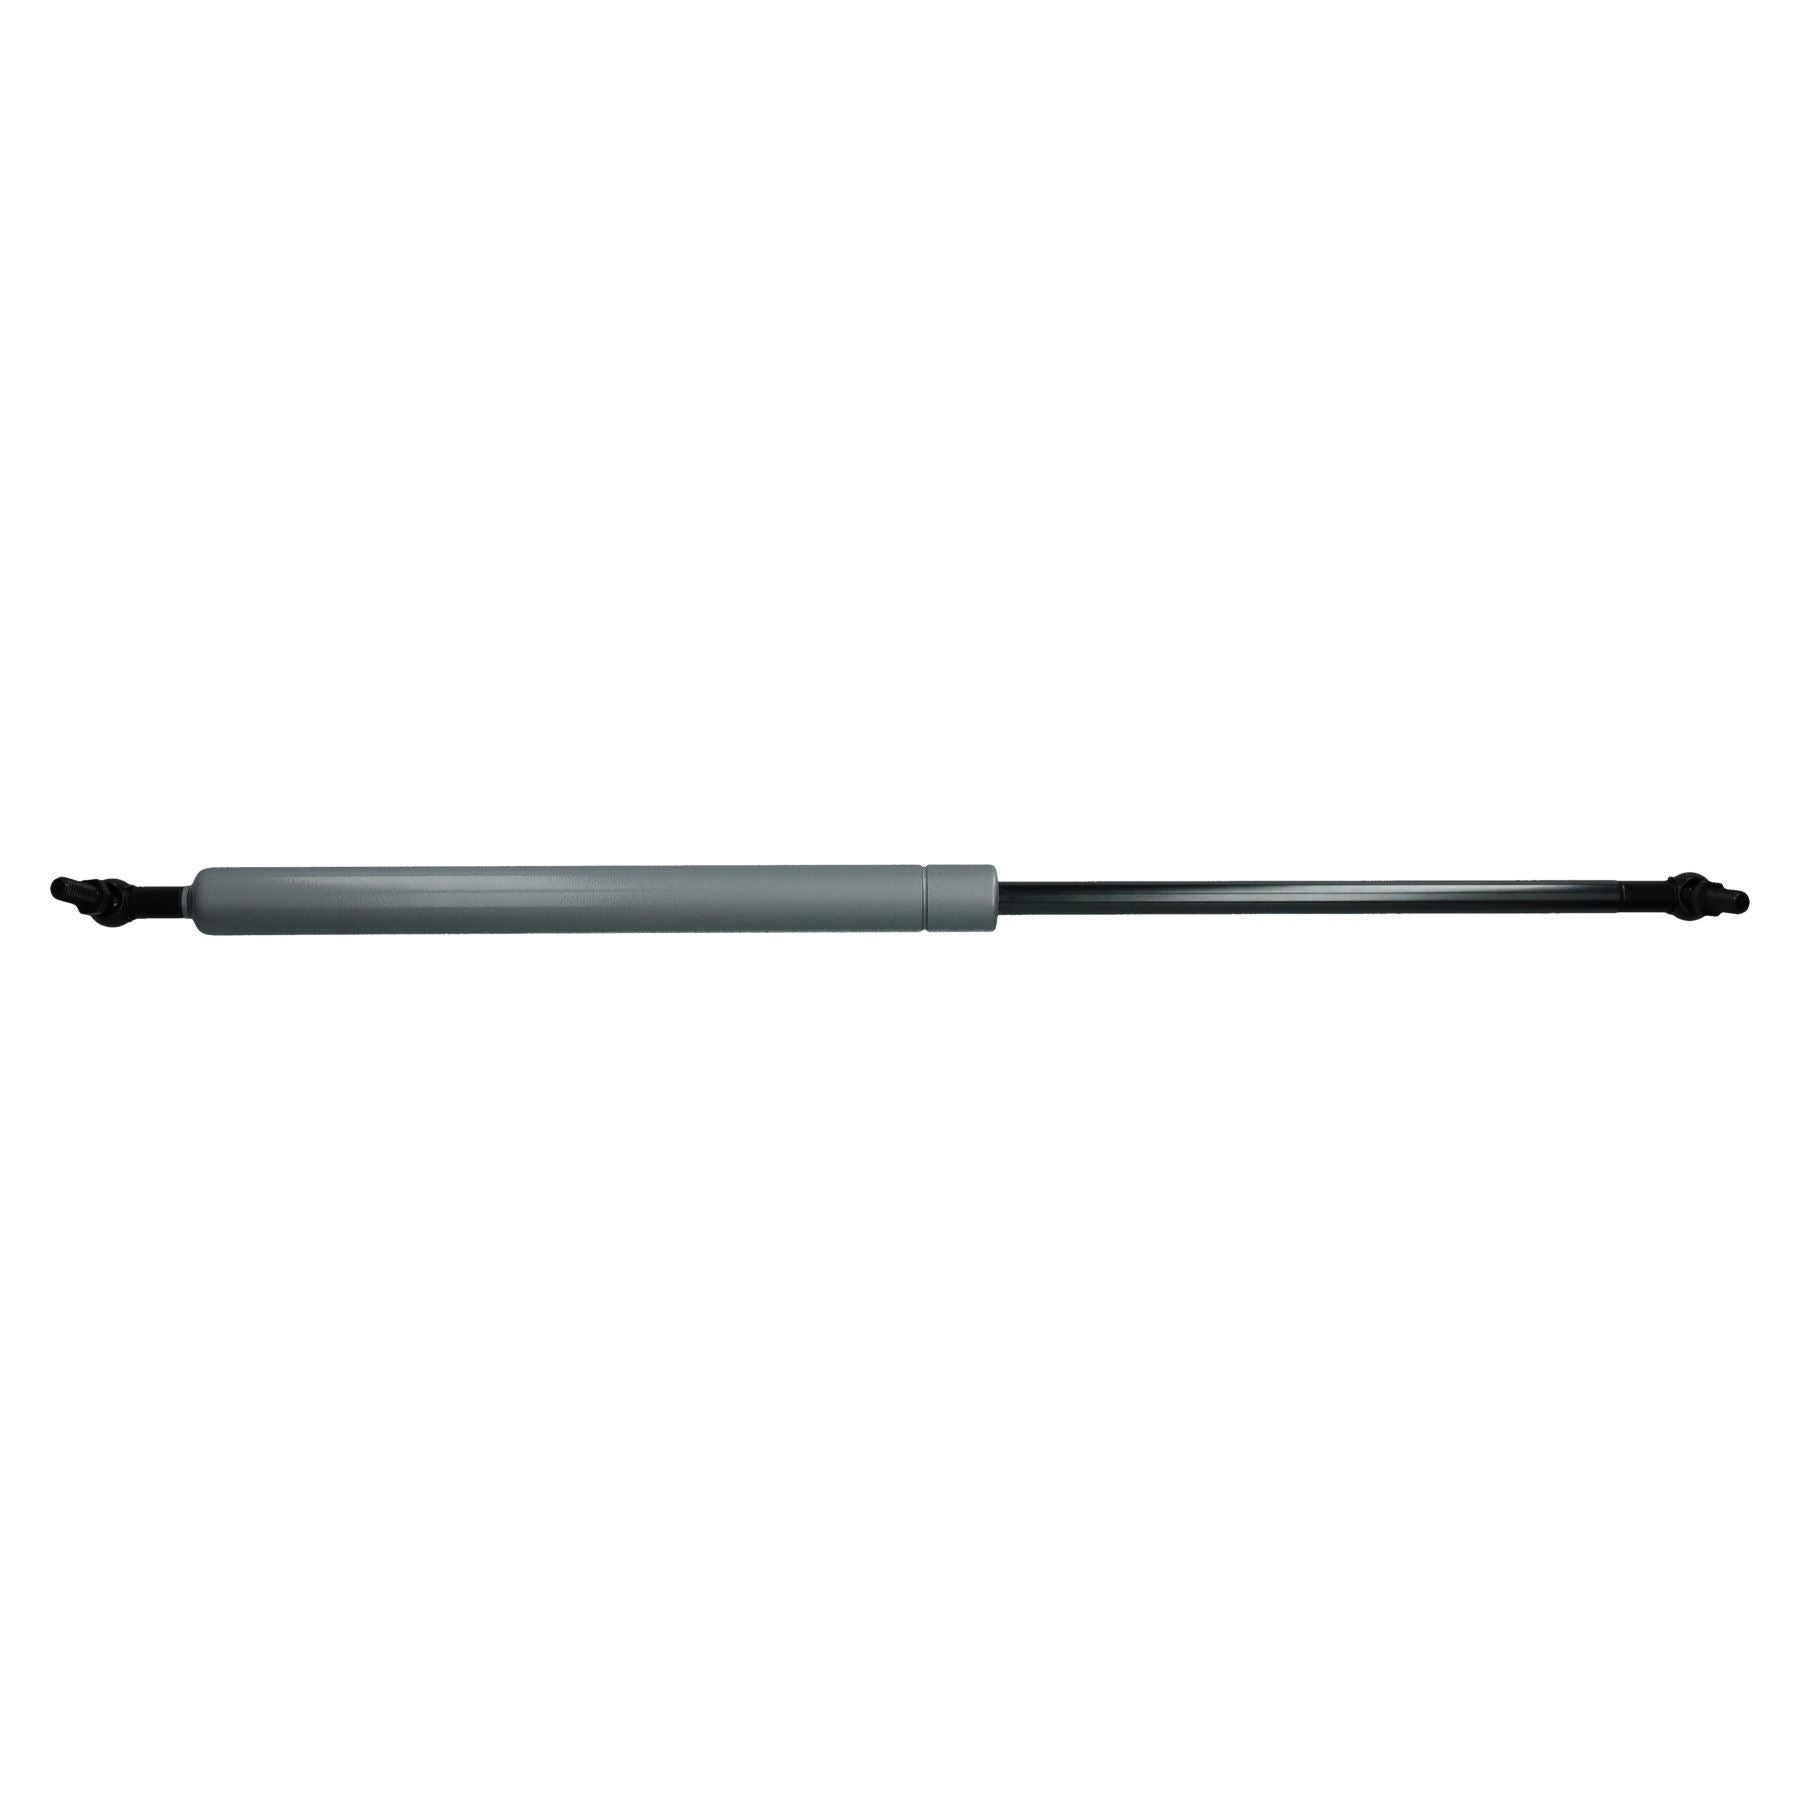 Spring Gas Strut Suitable for Ifor Williams Horsebox Trailers Front Rear Ramps